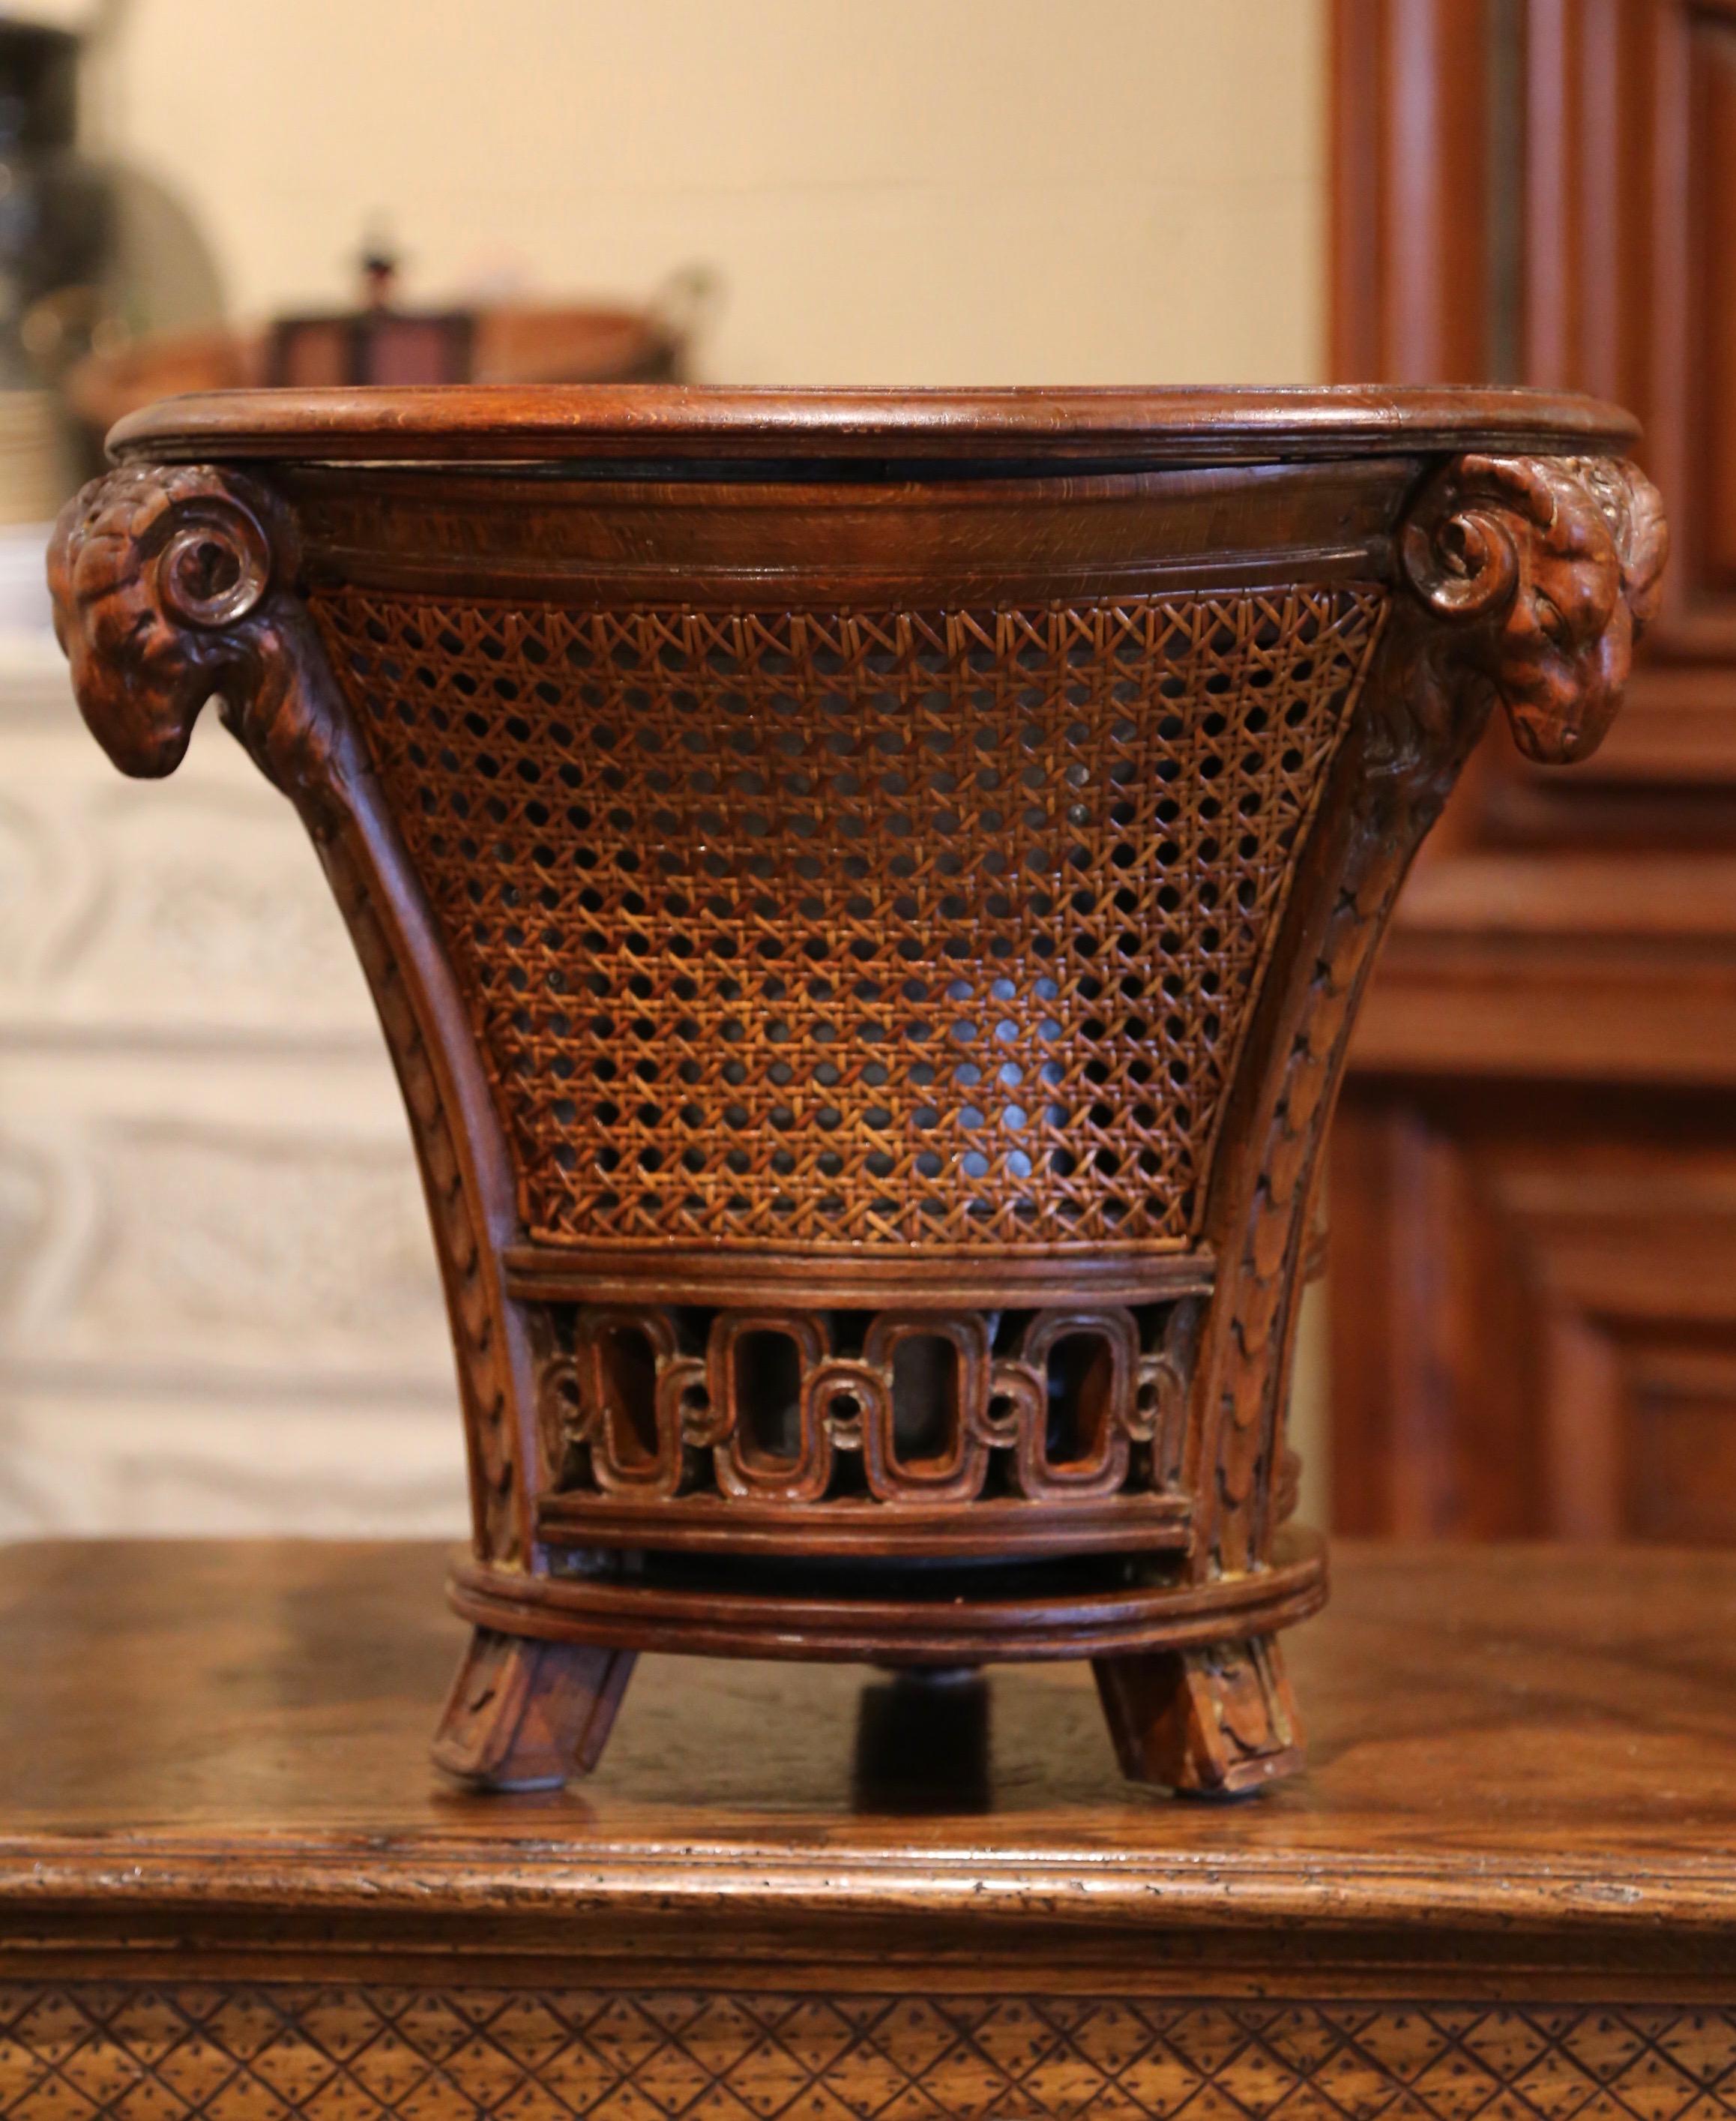 This elegant antique planter was crafted in France circa 1860; made of walnut and hand woven caning, the jardiniere is decorated with three ram head sculptures at the pediment further embellished with a carved pierced rim at the base over the small